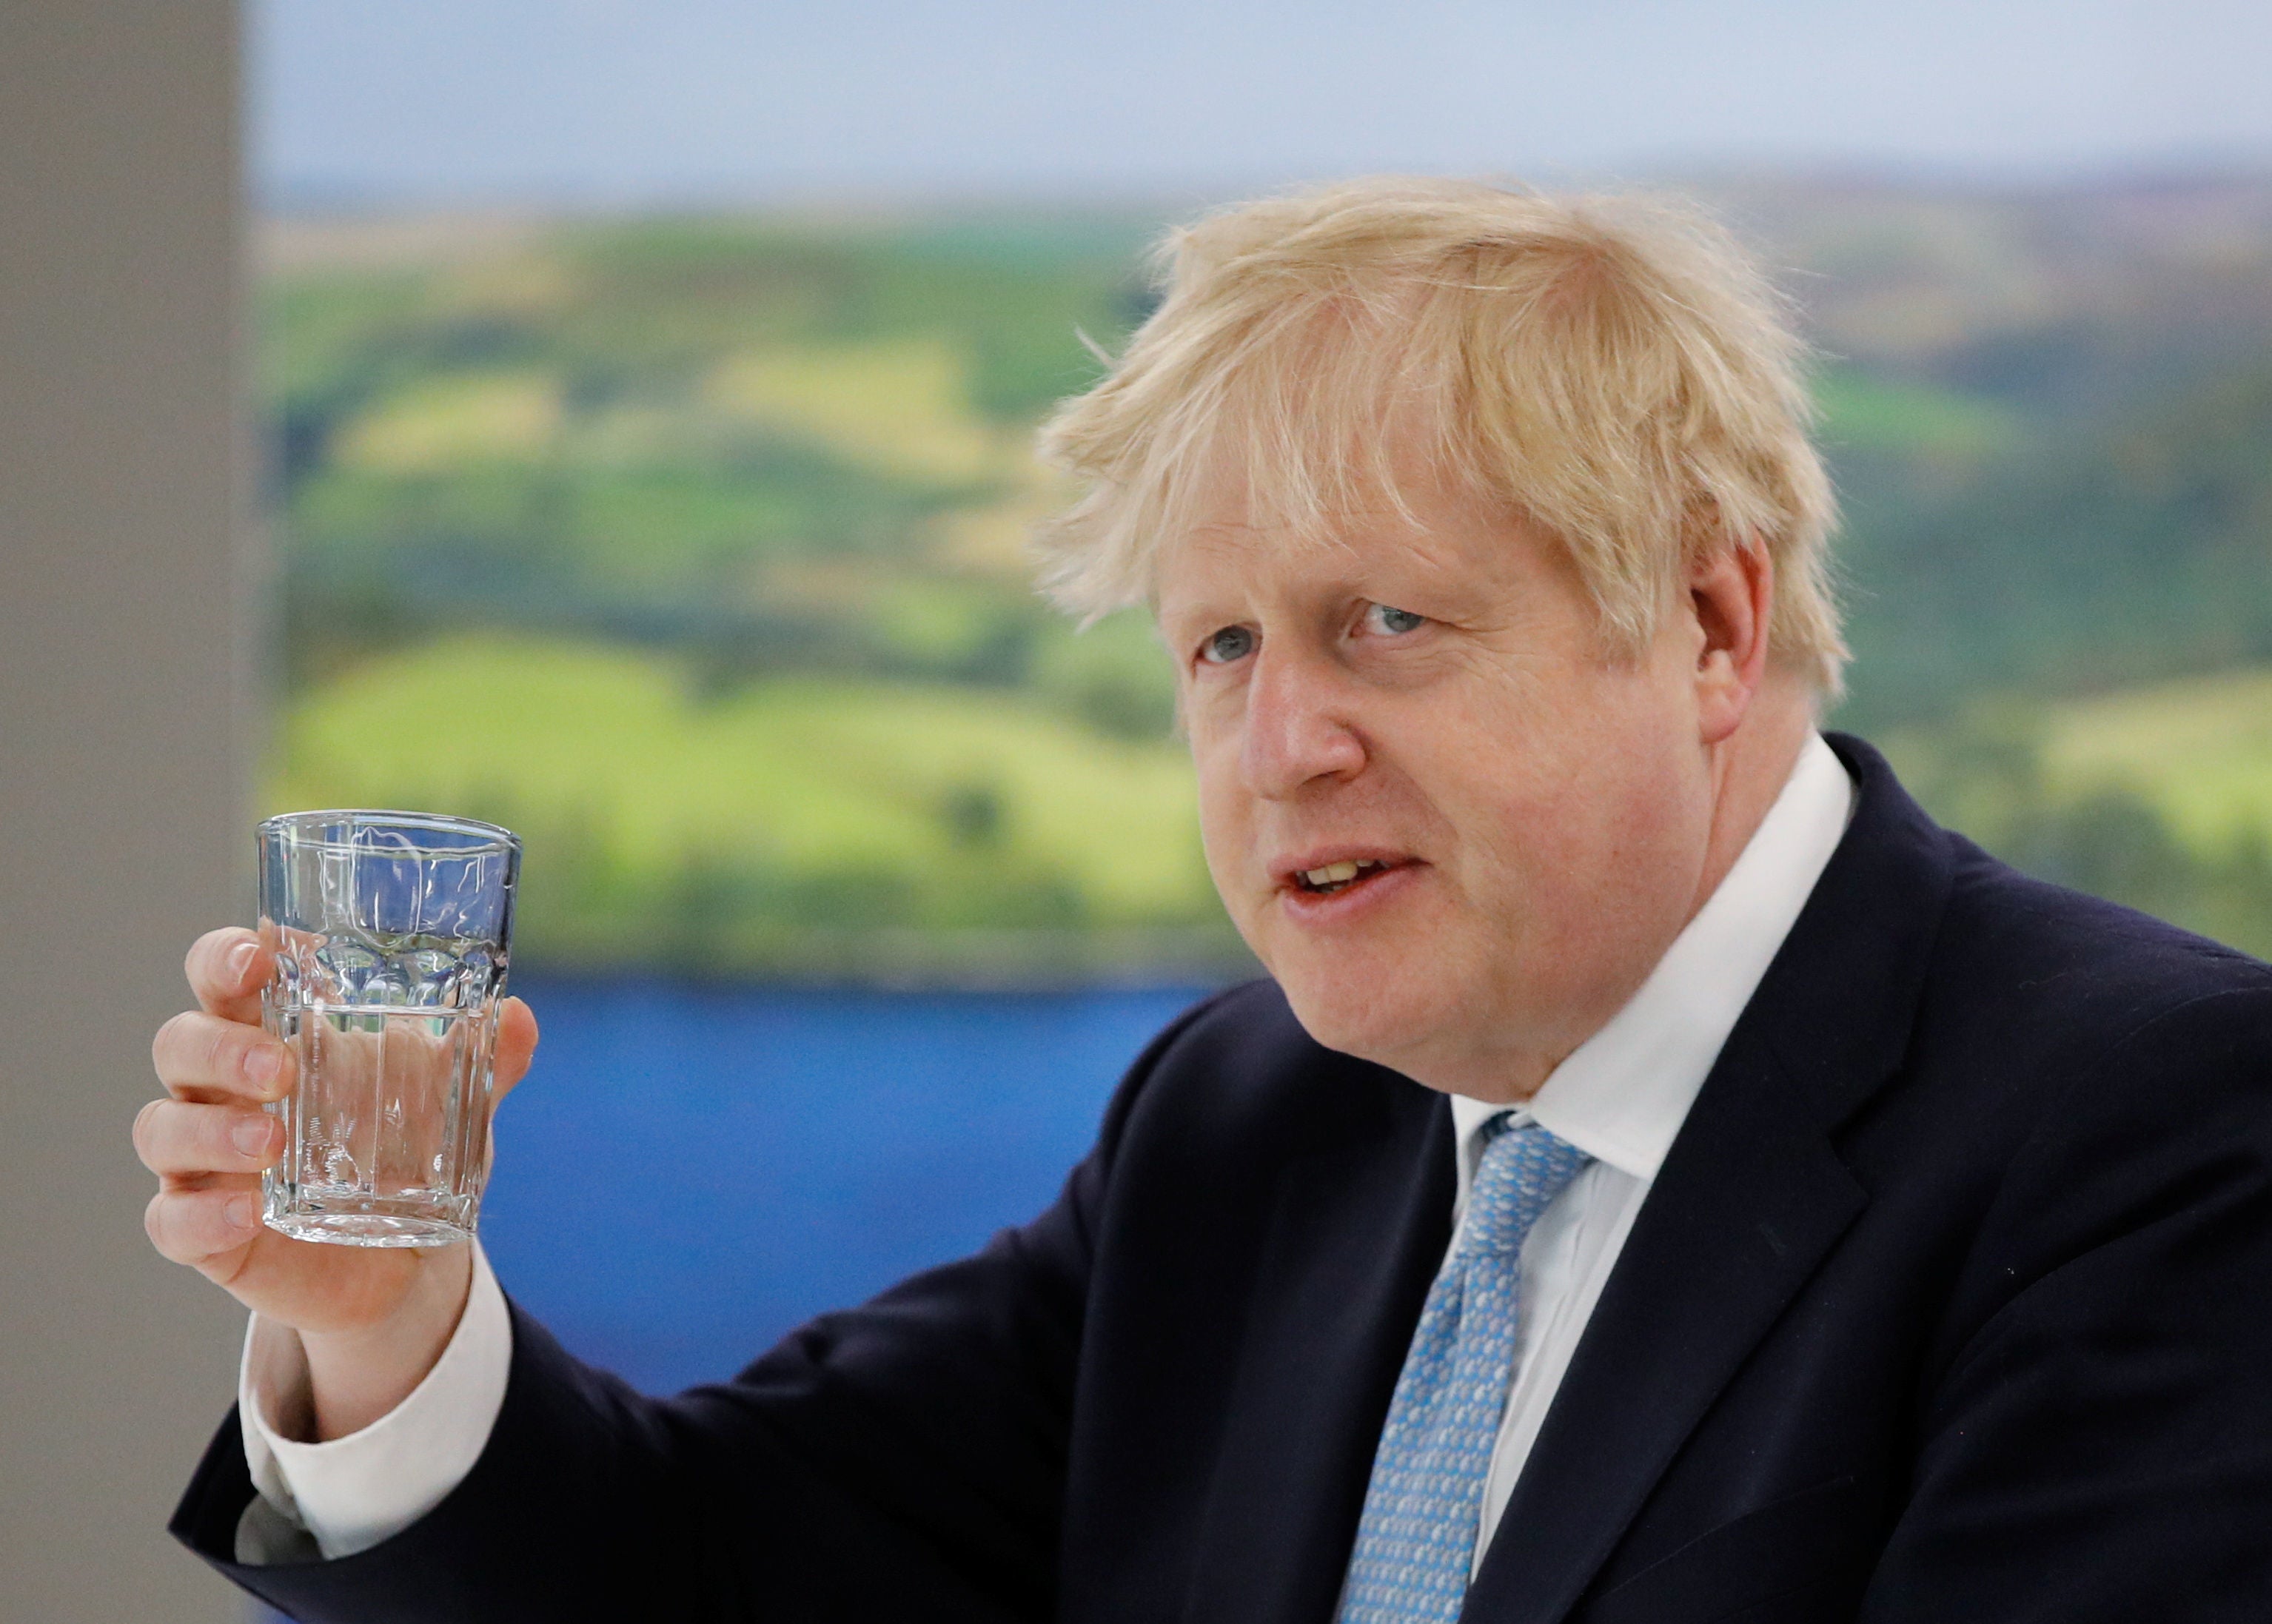 Research suggests it will be harder for Johnson to satisfy wider aspirations of Leave voters